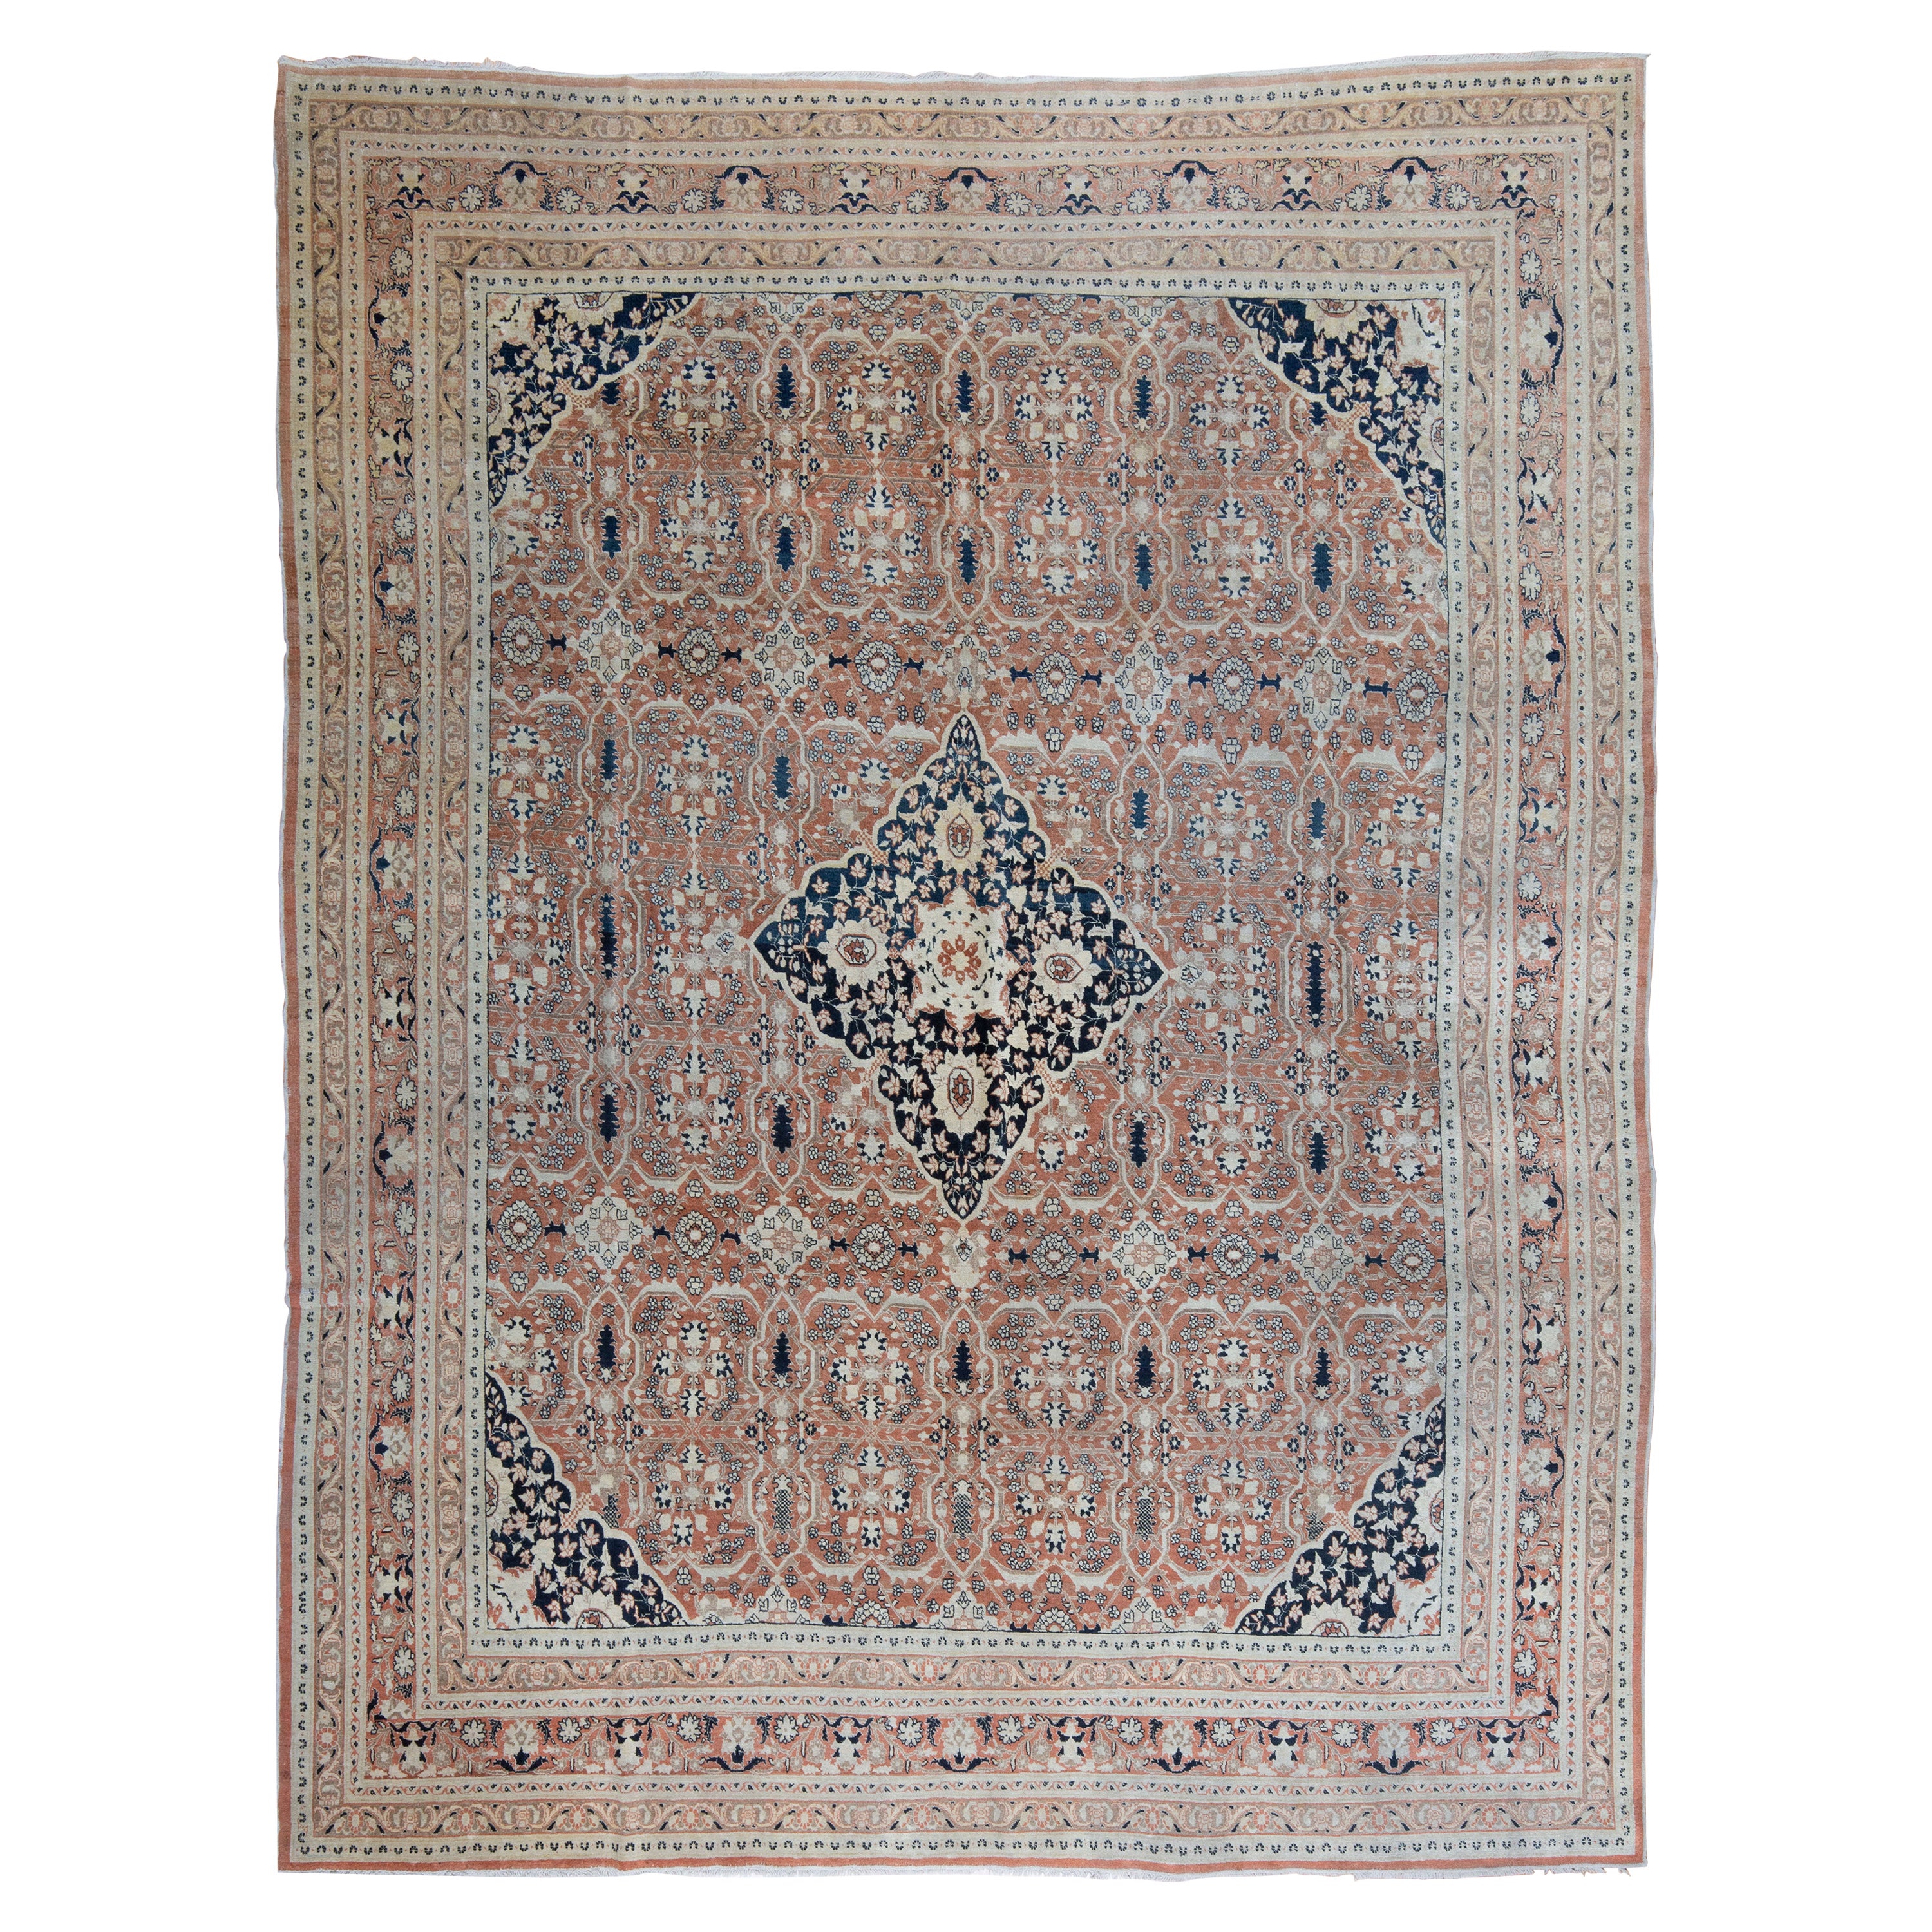 Antique Persian Hadji Jalili Tabriz Blush Pink and Blue Rug, Late 19th Century For Sale